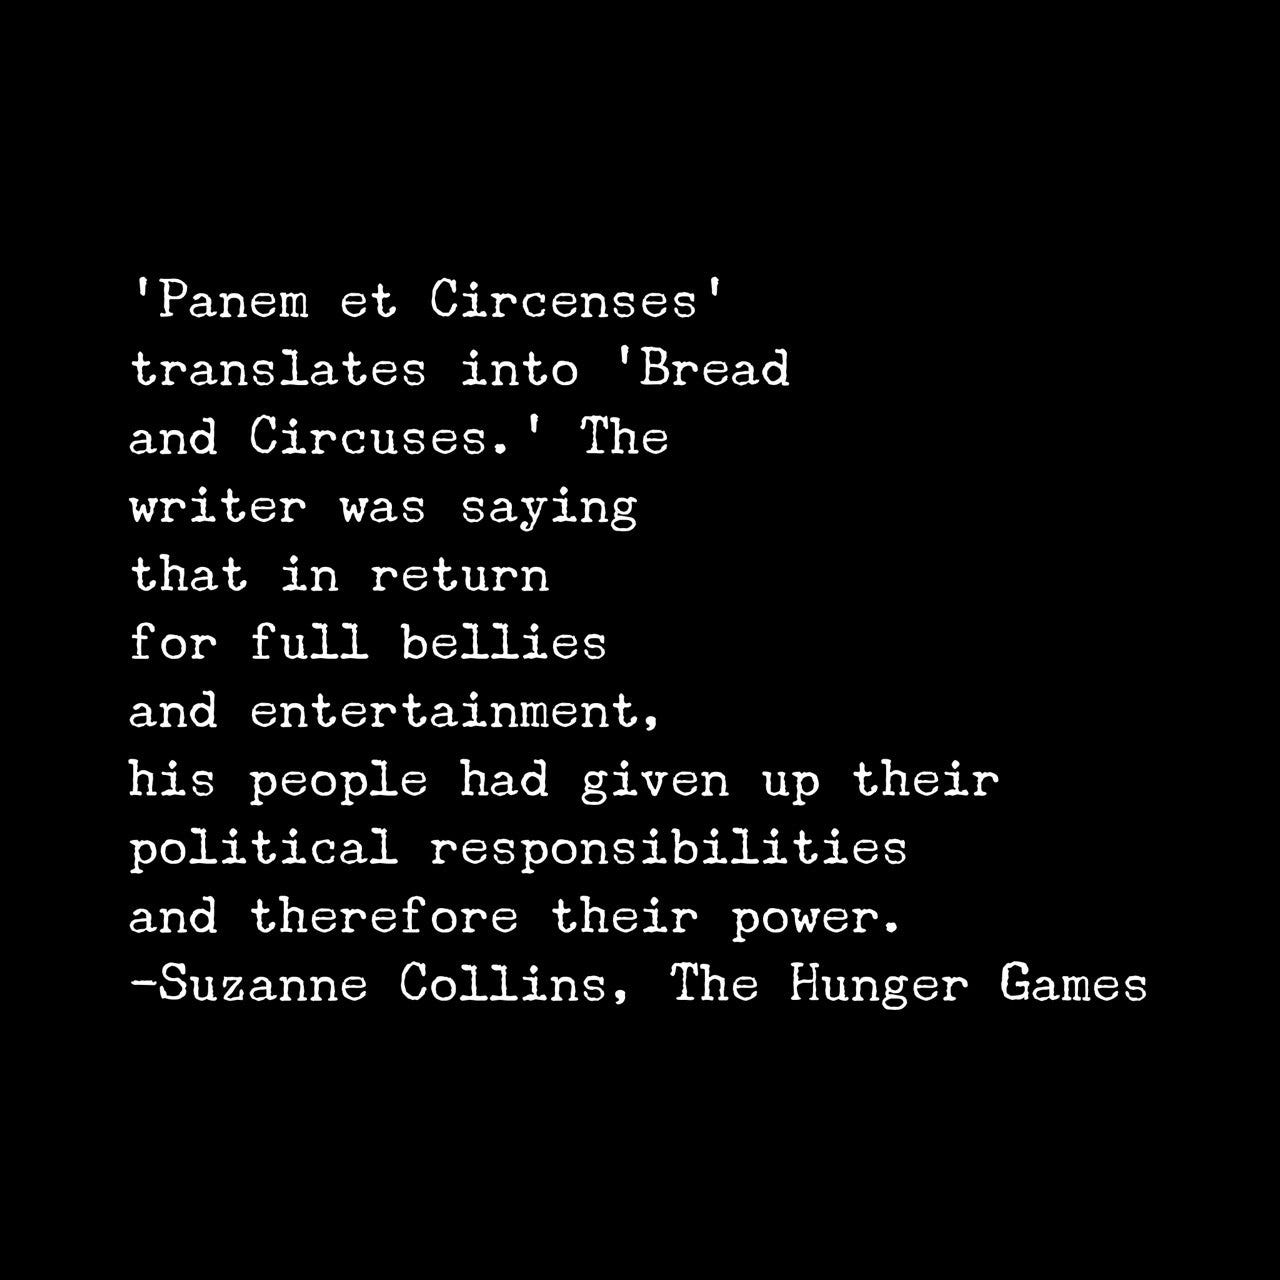 “Panem et Circenses" translates into 'Bread and Circuses.' The writer was saying that in return for full bellies and entertainment, his people had given up their political responsibilities and therefore their power.” 